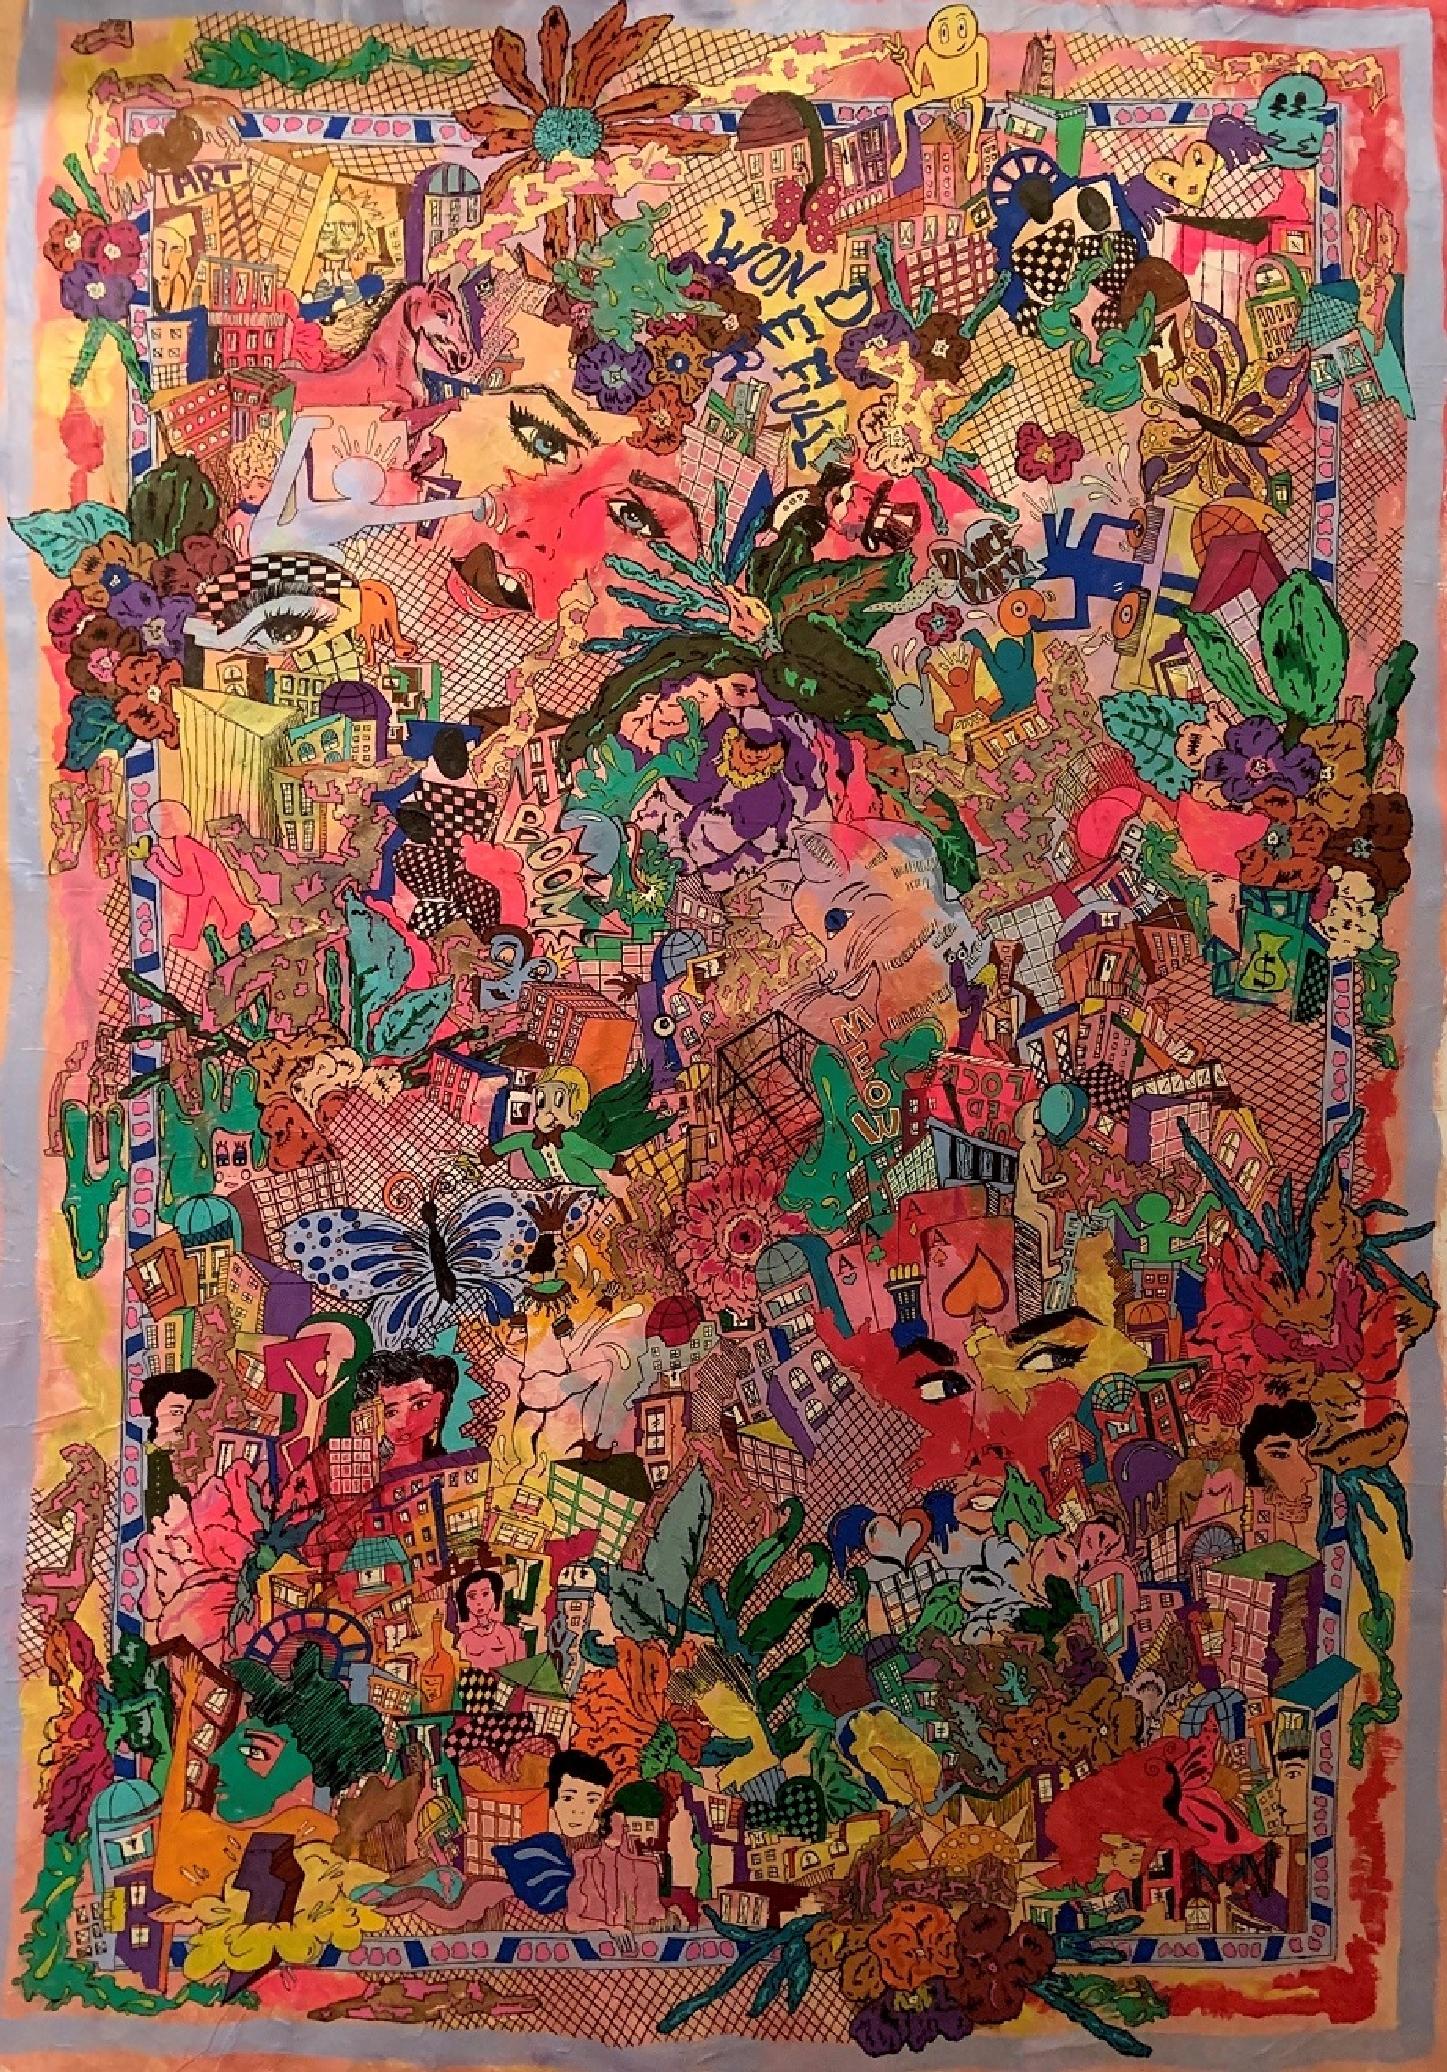 "Life in Quarantine" Acrylic & Inks Painting 43" x 30" inch by Kinda Adly